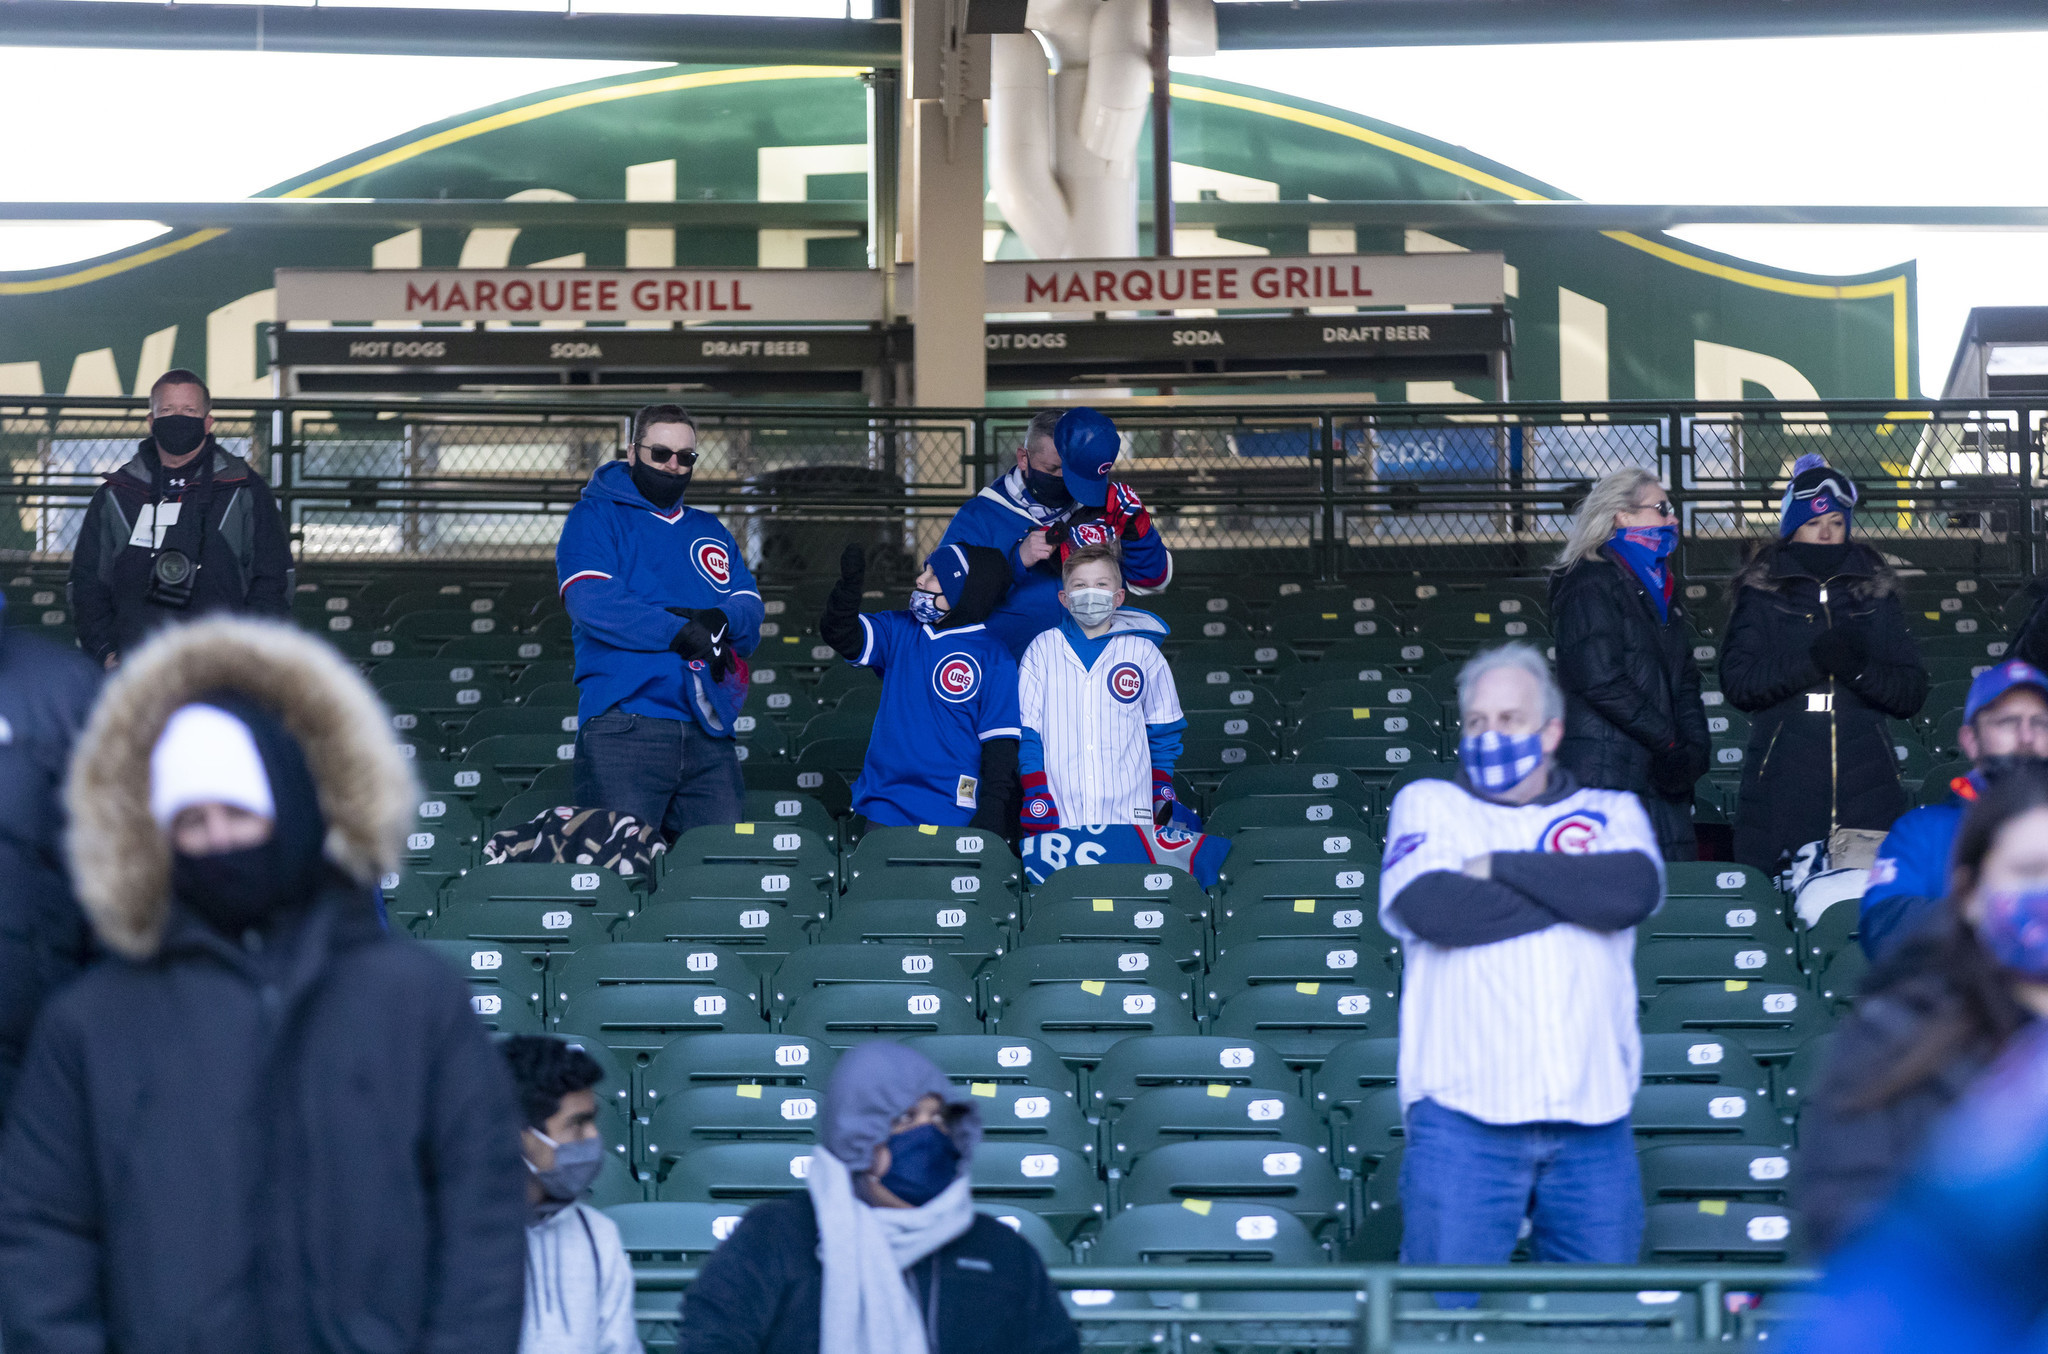 COVID Chicago: Cubs, White Sox fans can return to Wrigley Field